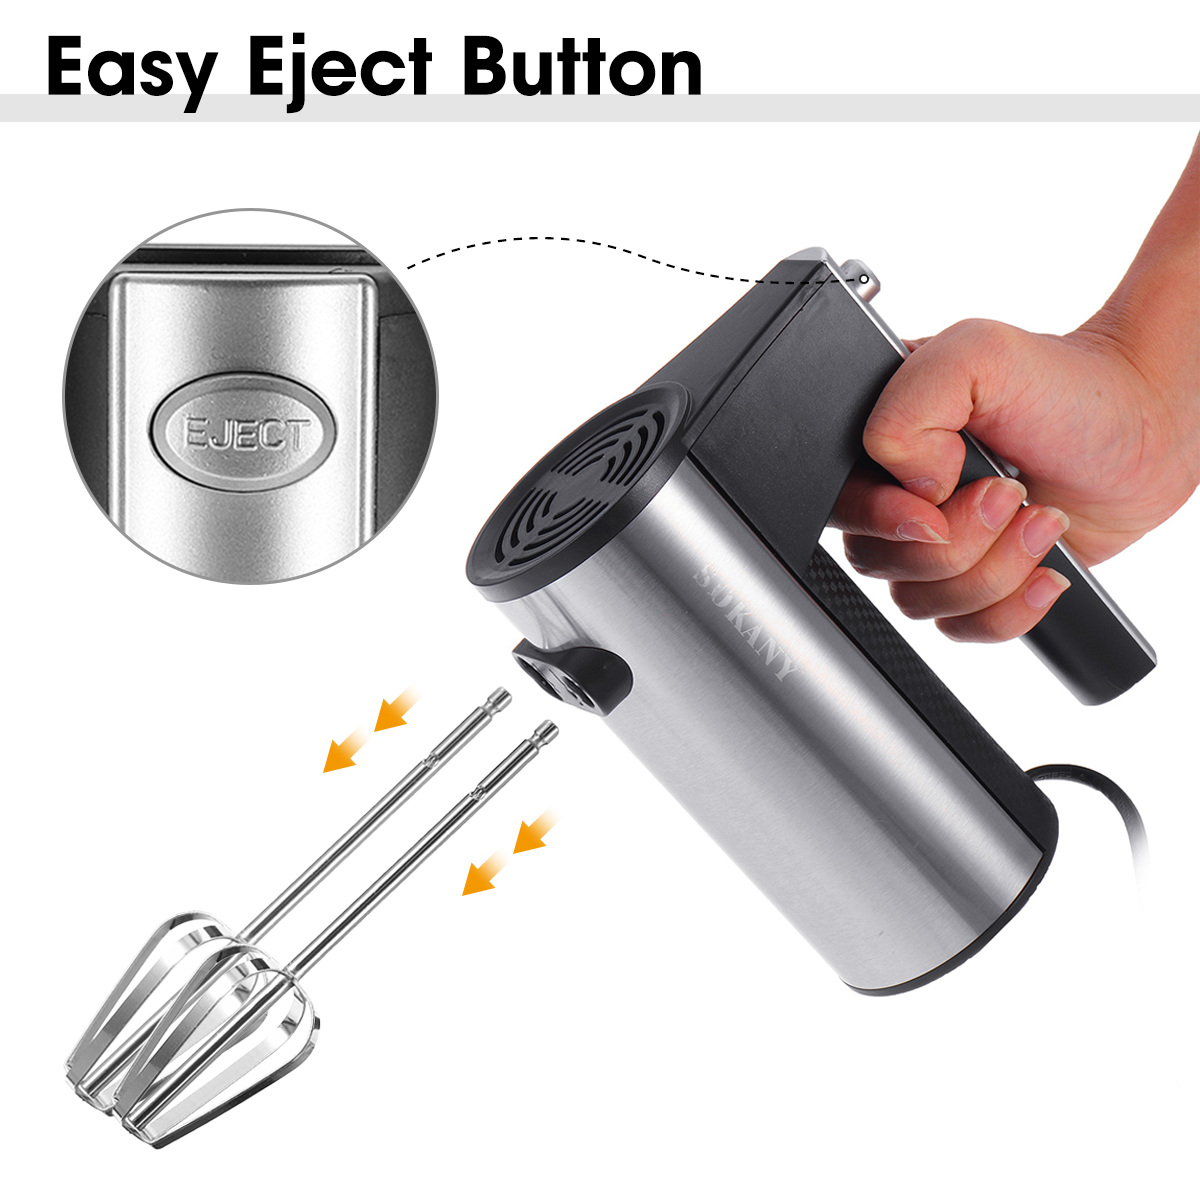 SOKANY 6638 300W 220V 5 Speed Electric Hand Mixer Whisk Egg Beater Cake Baking Home Handheld Small Automatic Mini Cream Blenders